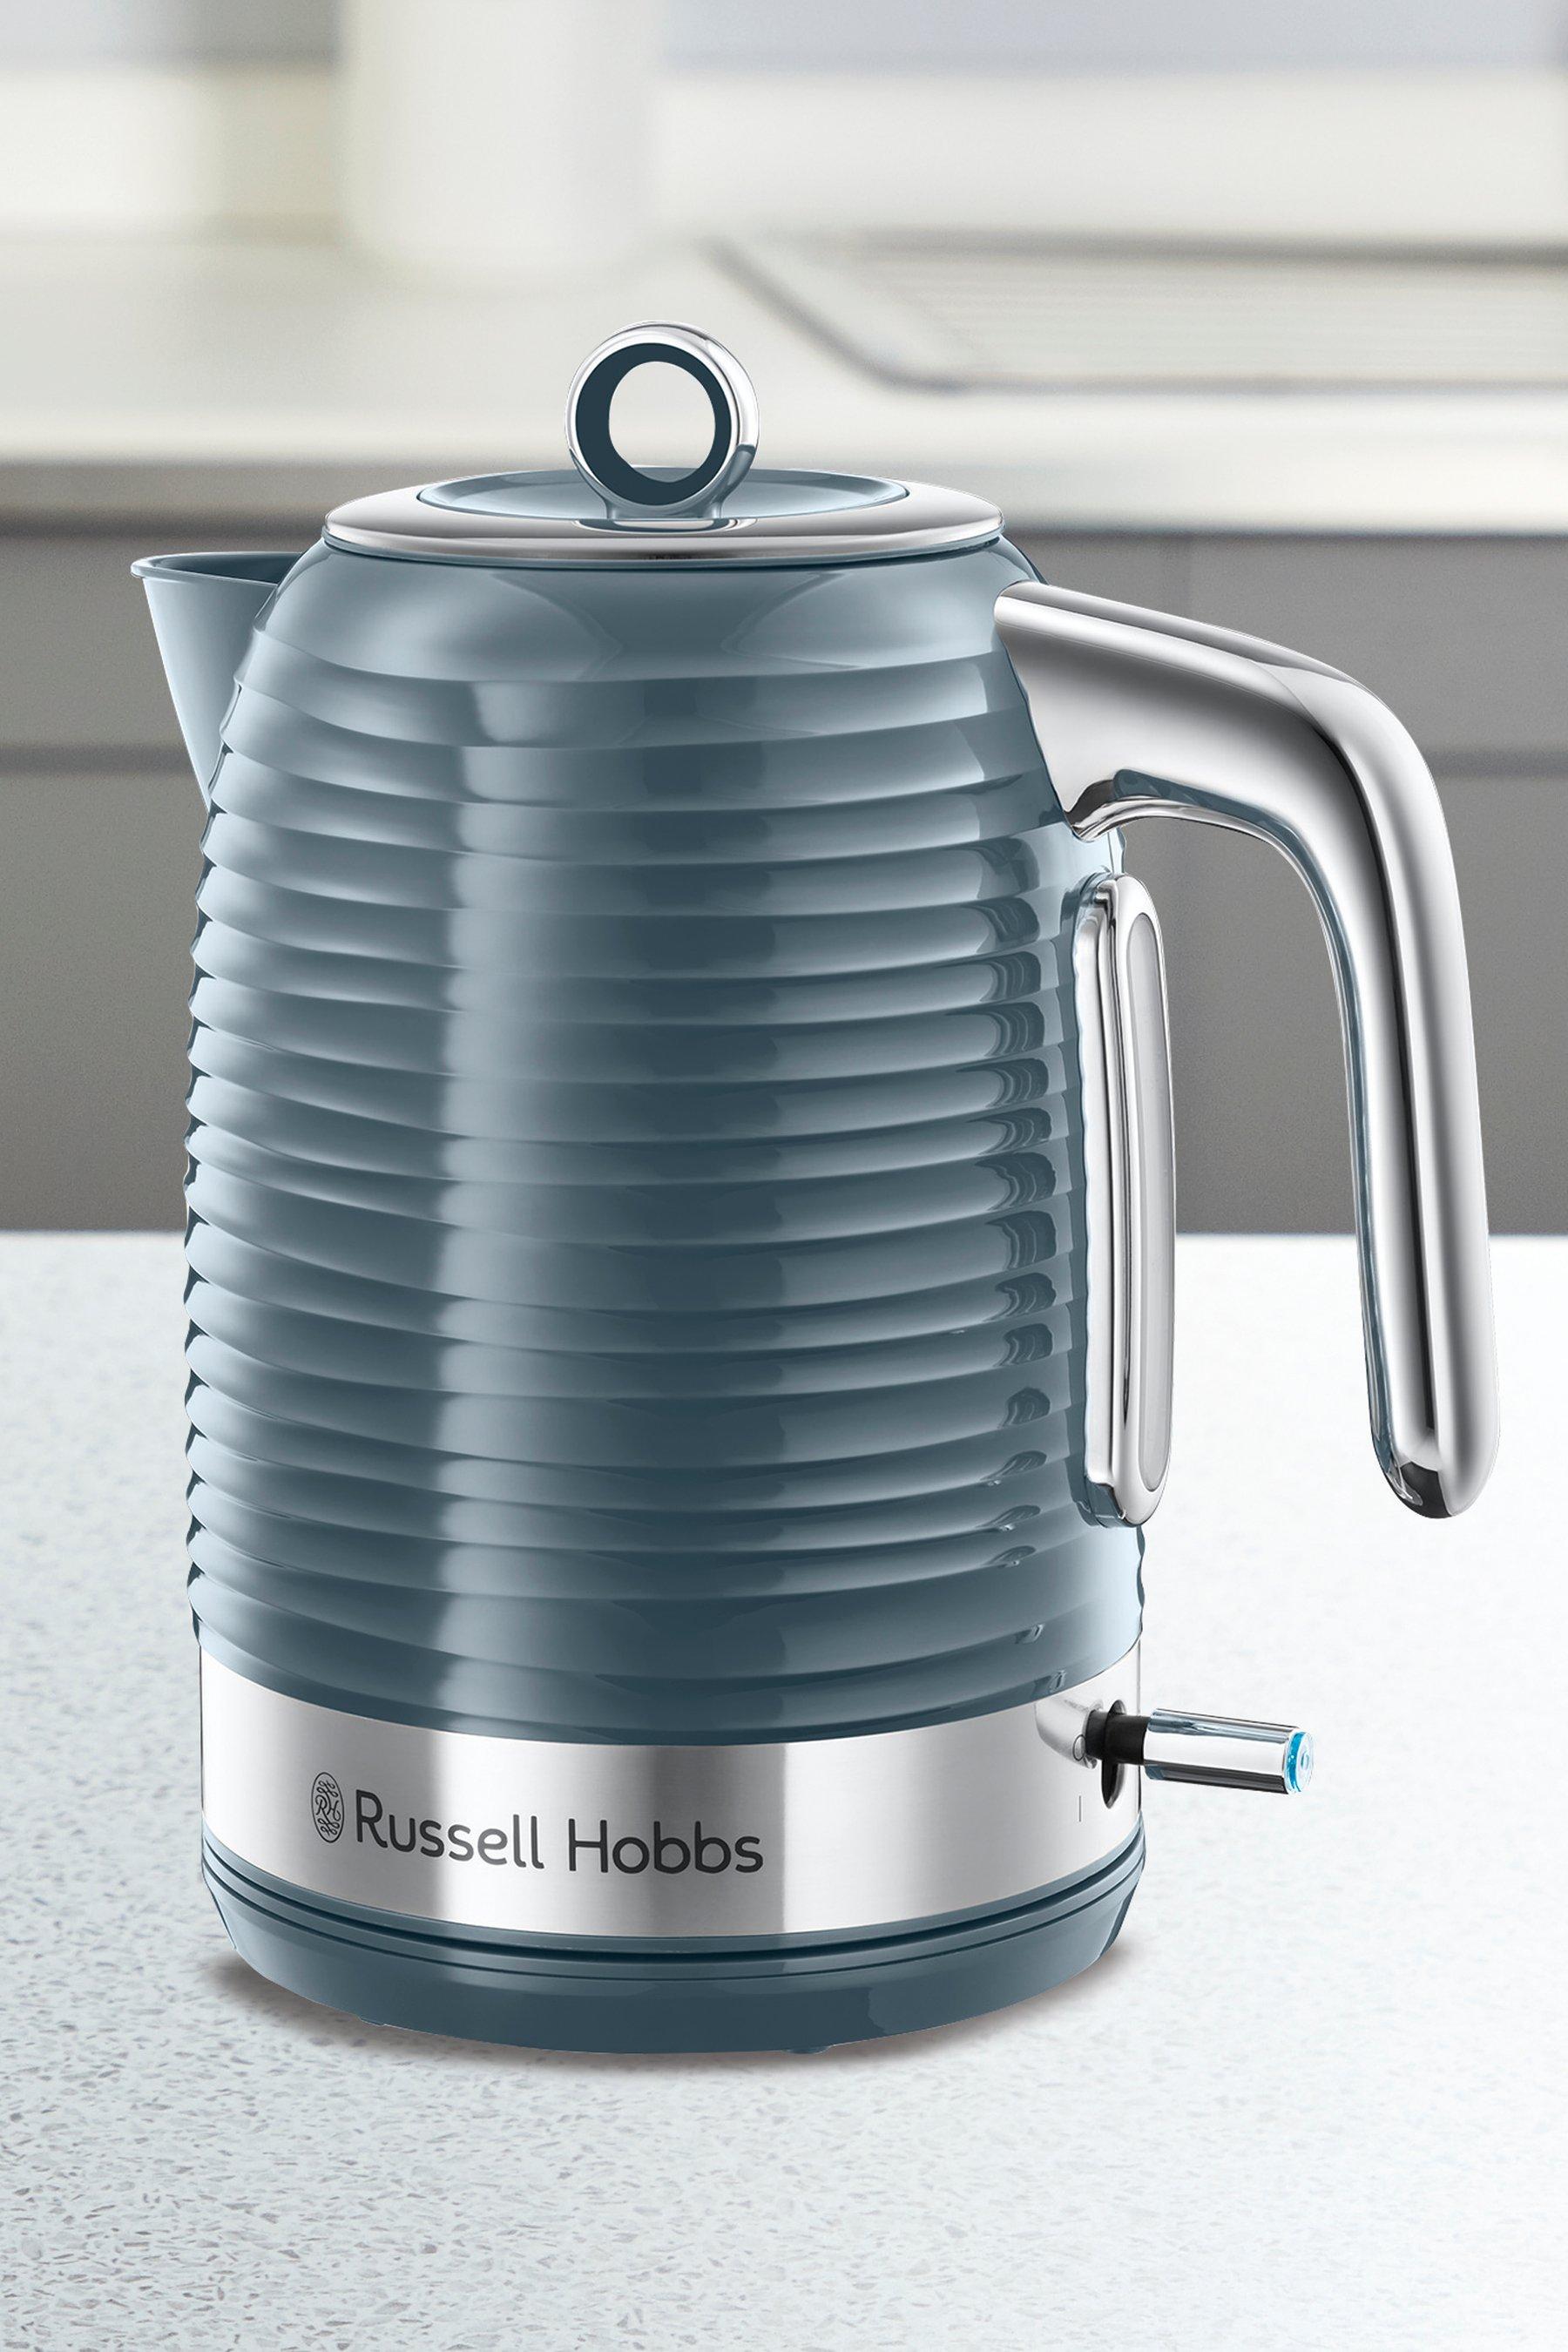 Russell Hobbs 1.7L Inspire Electric Kettle, 24363, Grey